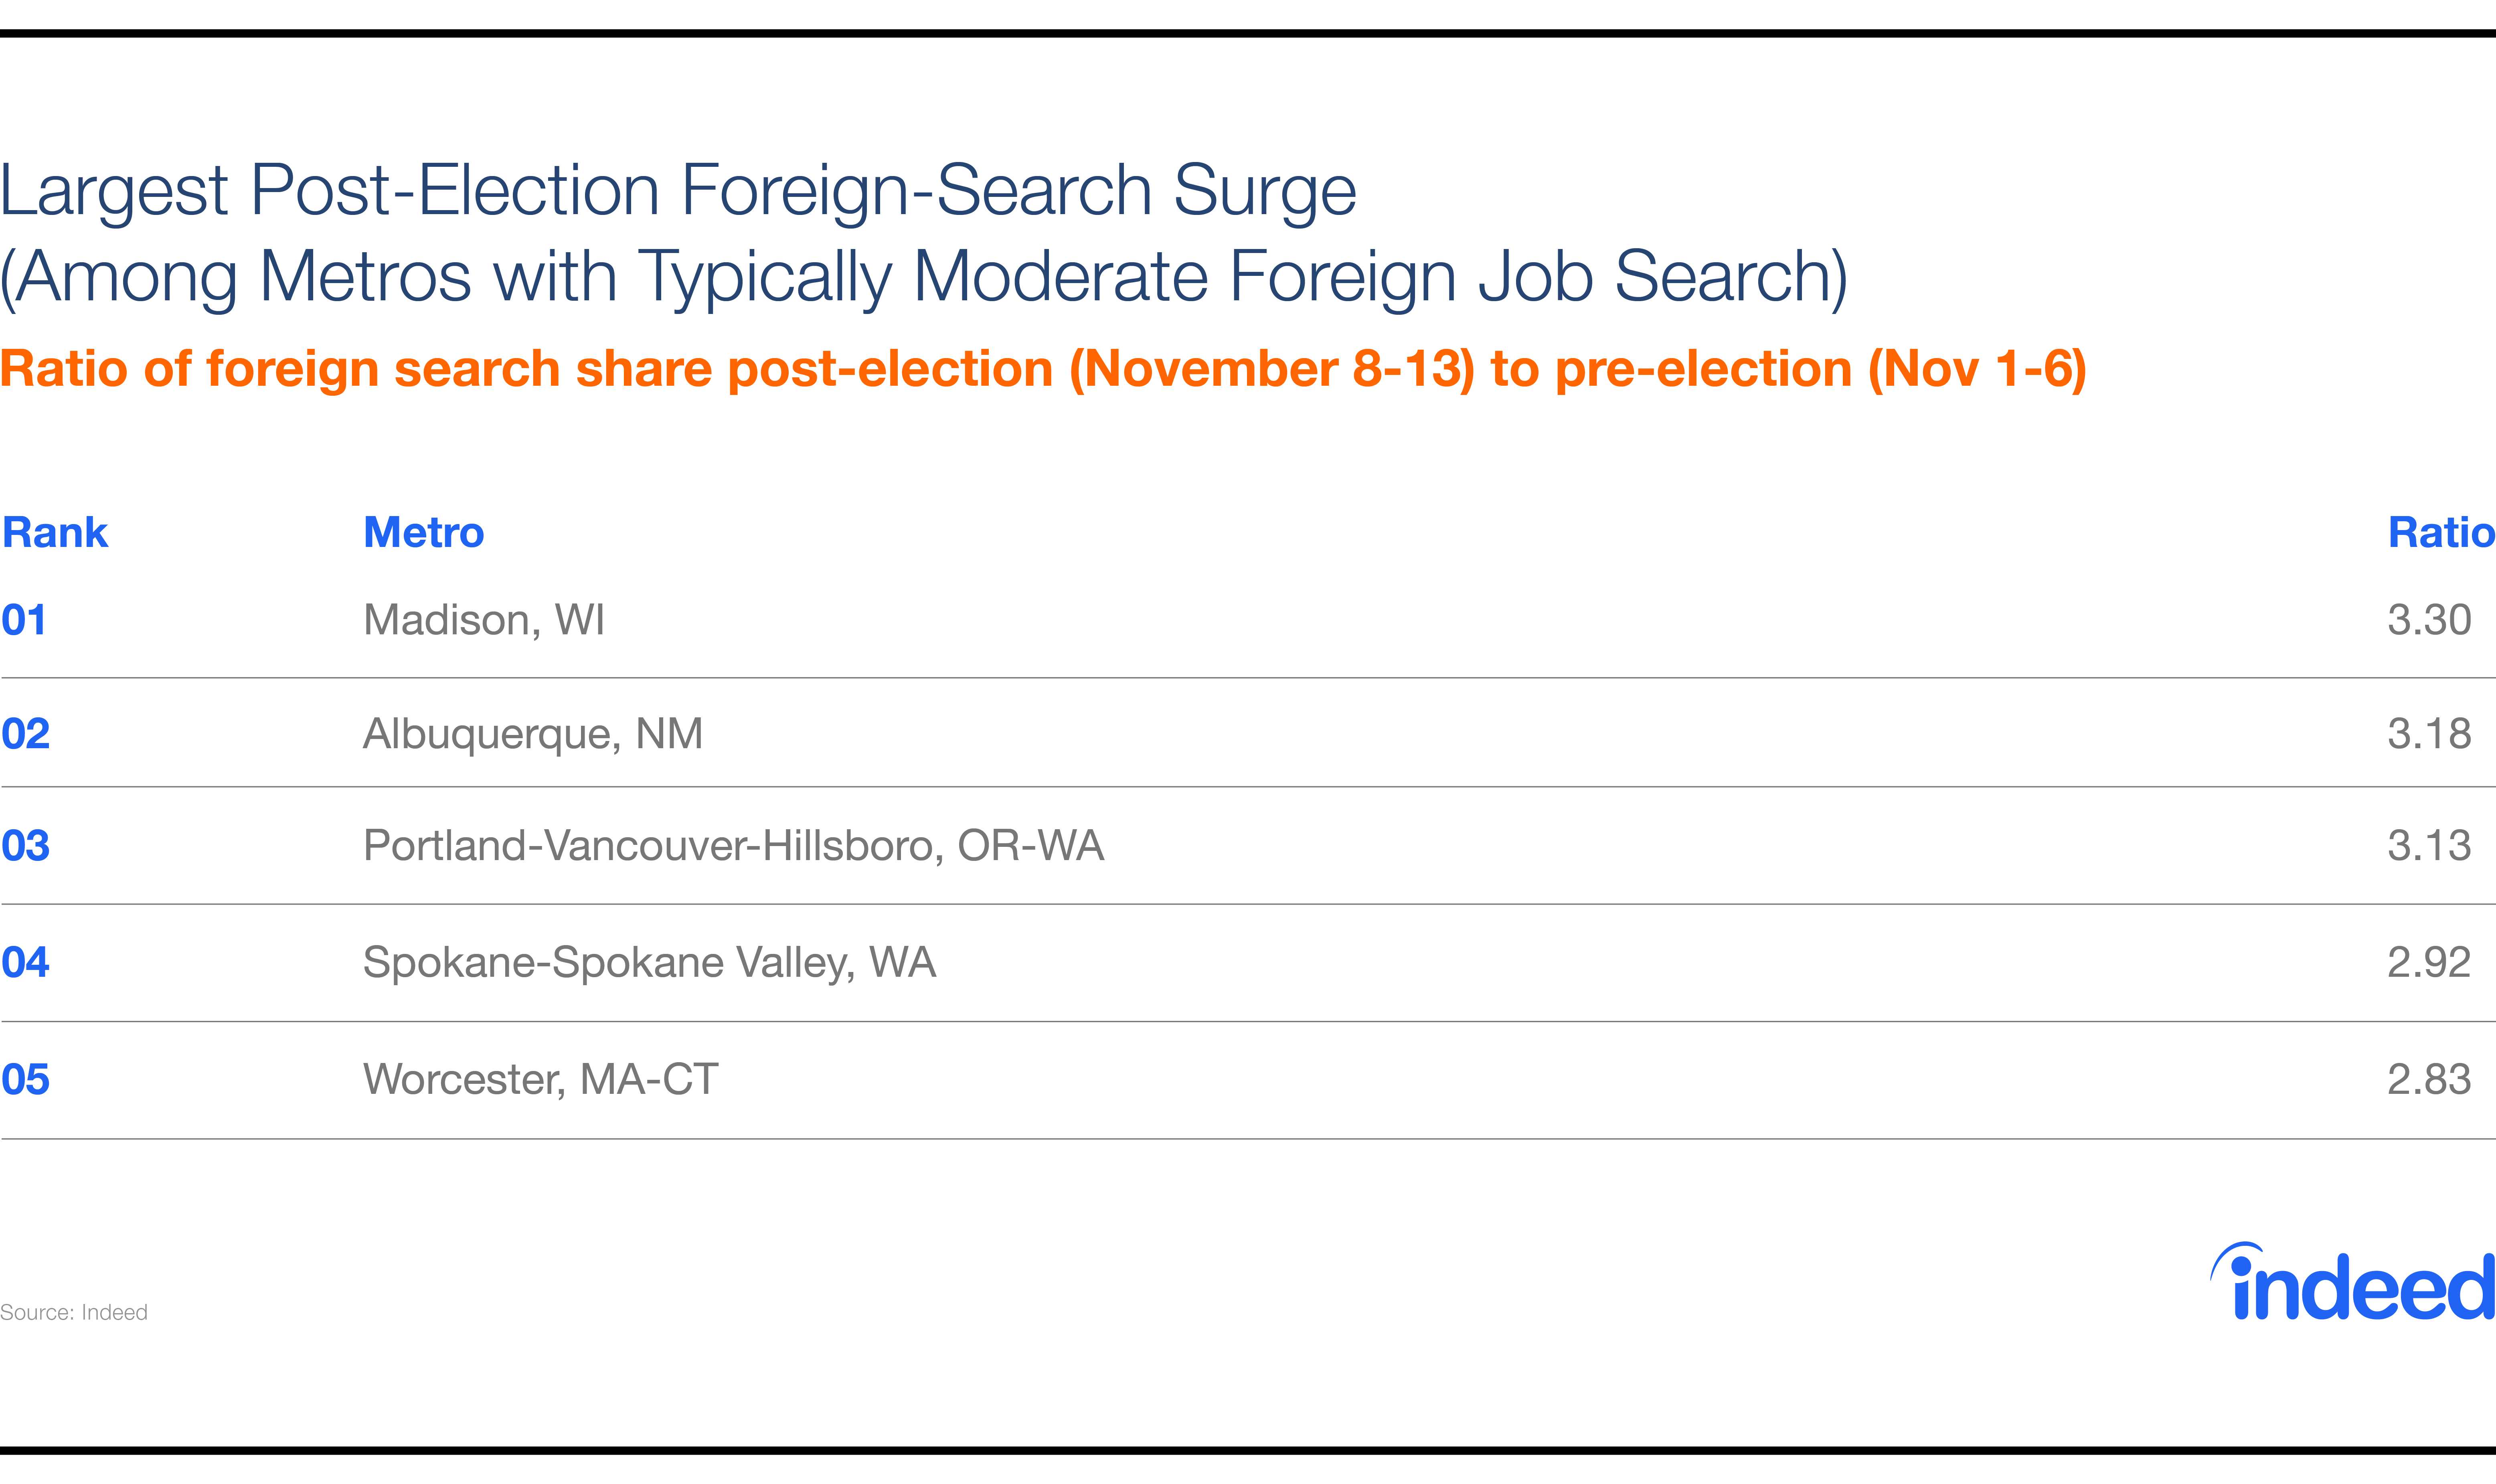 Largest Post-Election foreign-search surge (Among metros with typically moderate foreign job search)